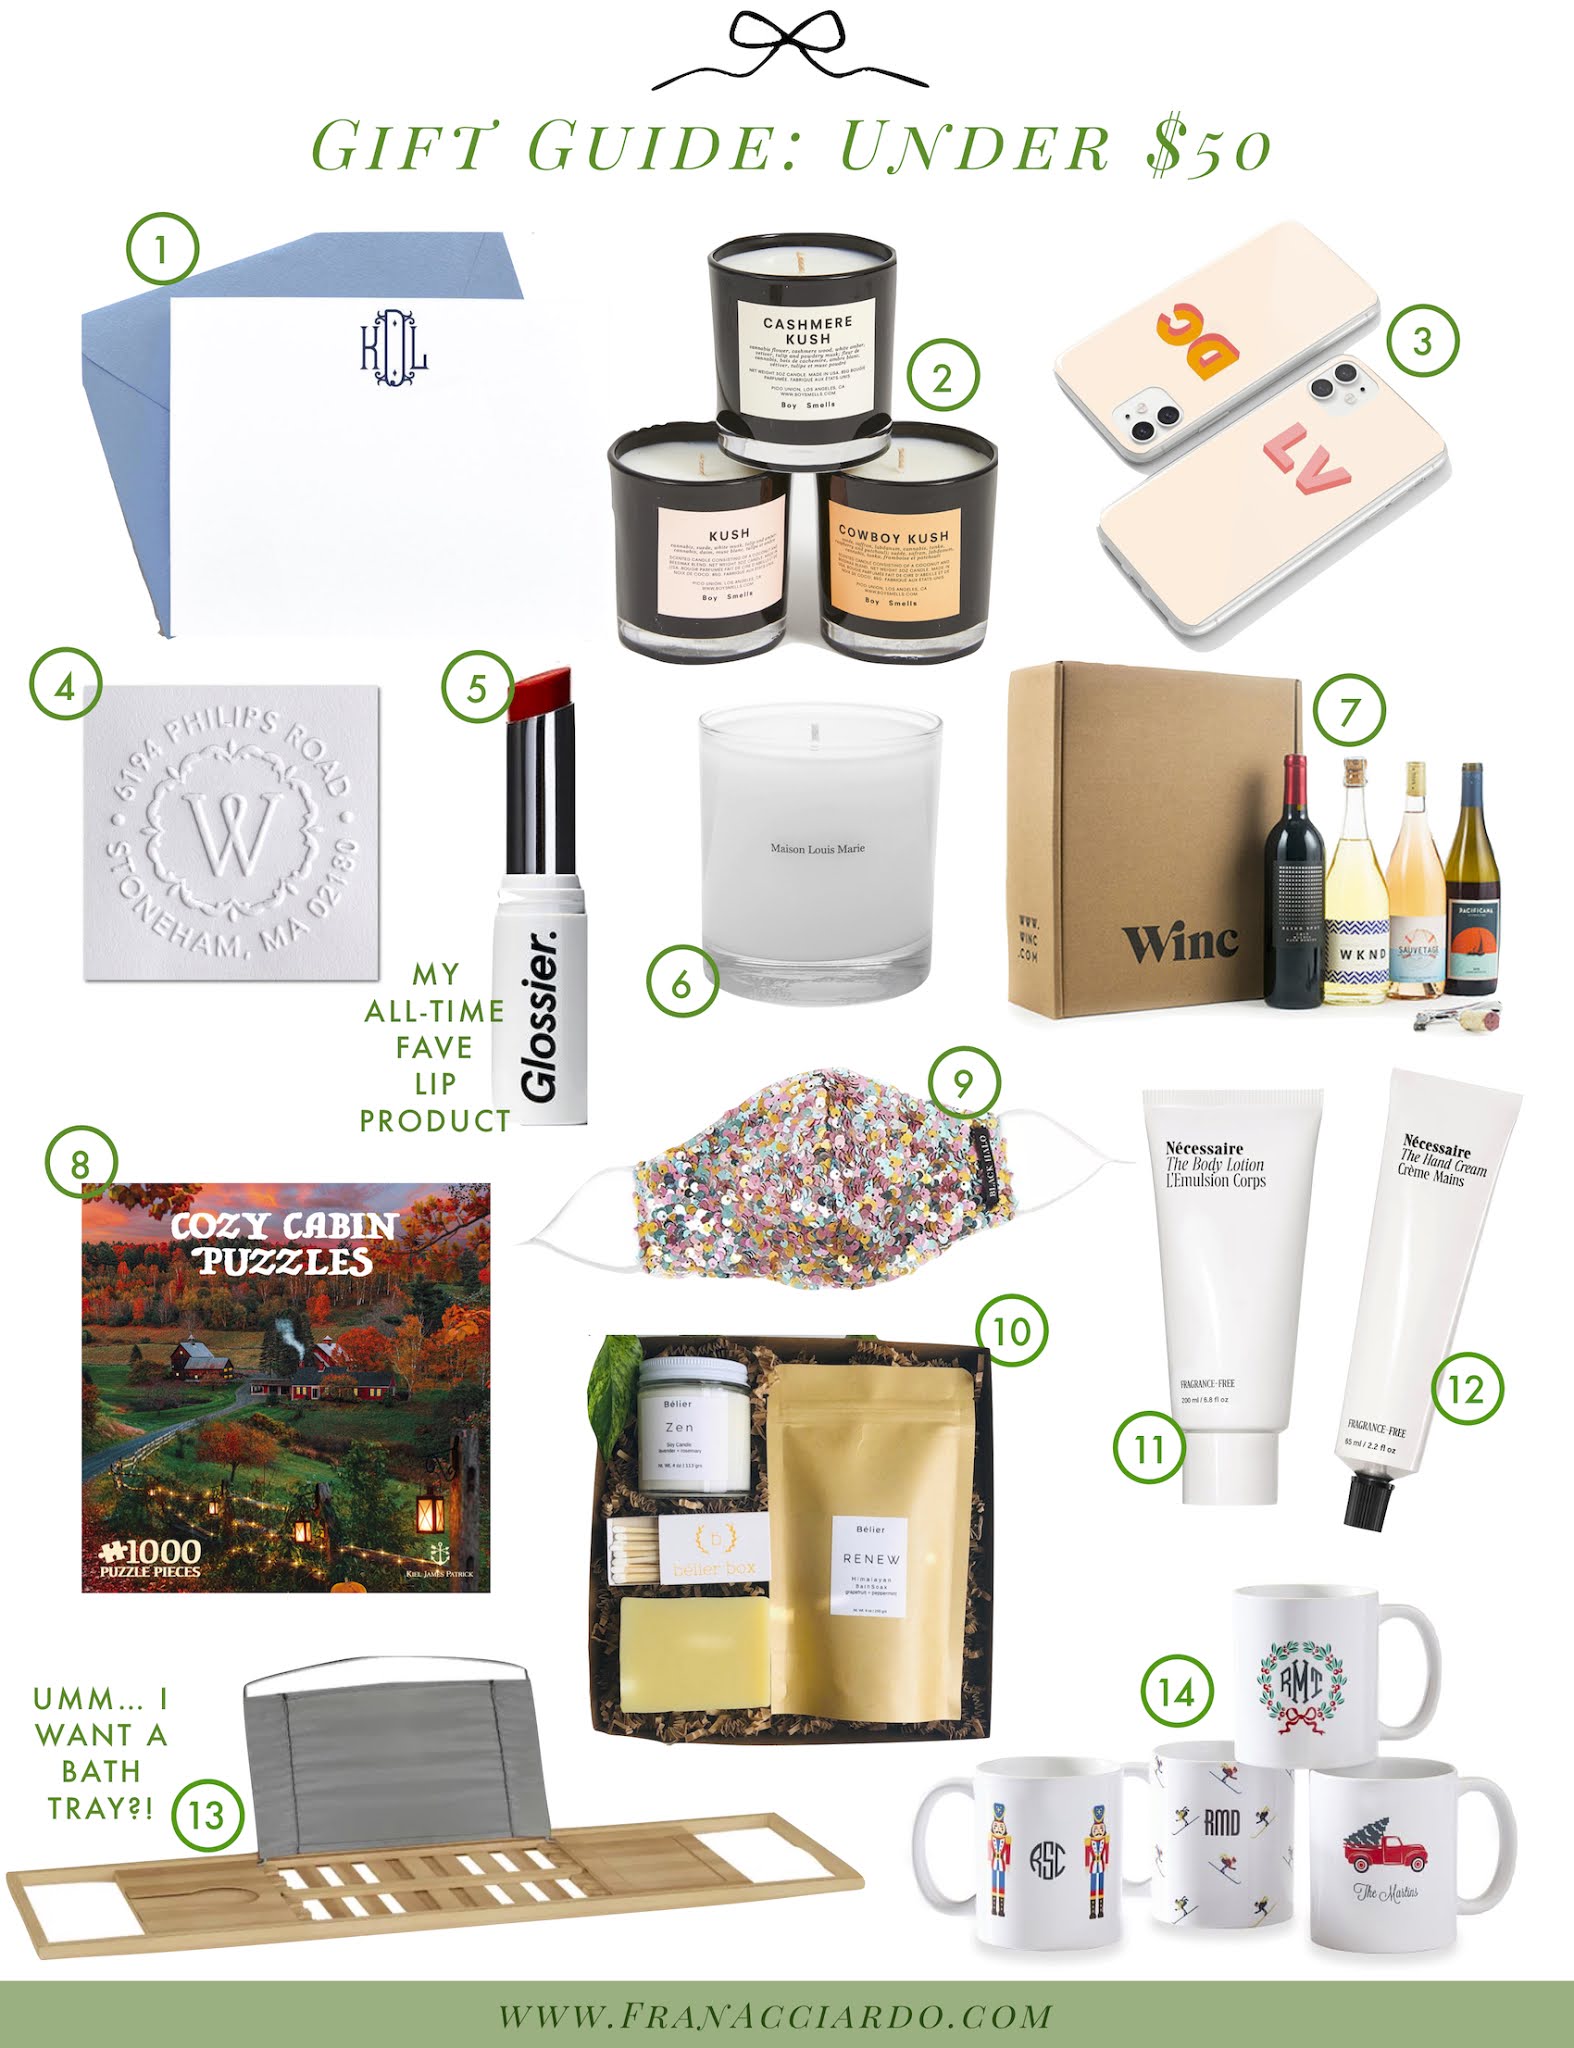 The First Gift Guide! Thoughtful Gifts Under $50